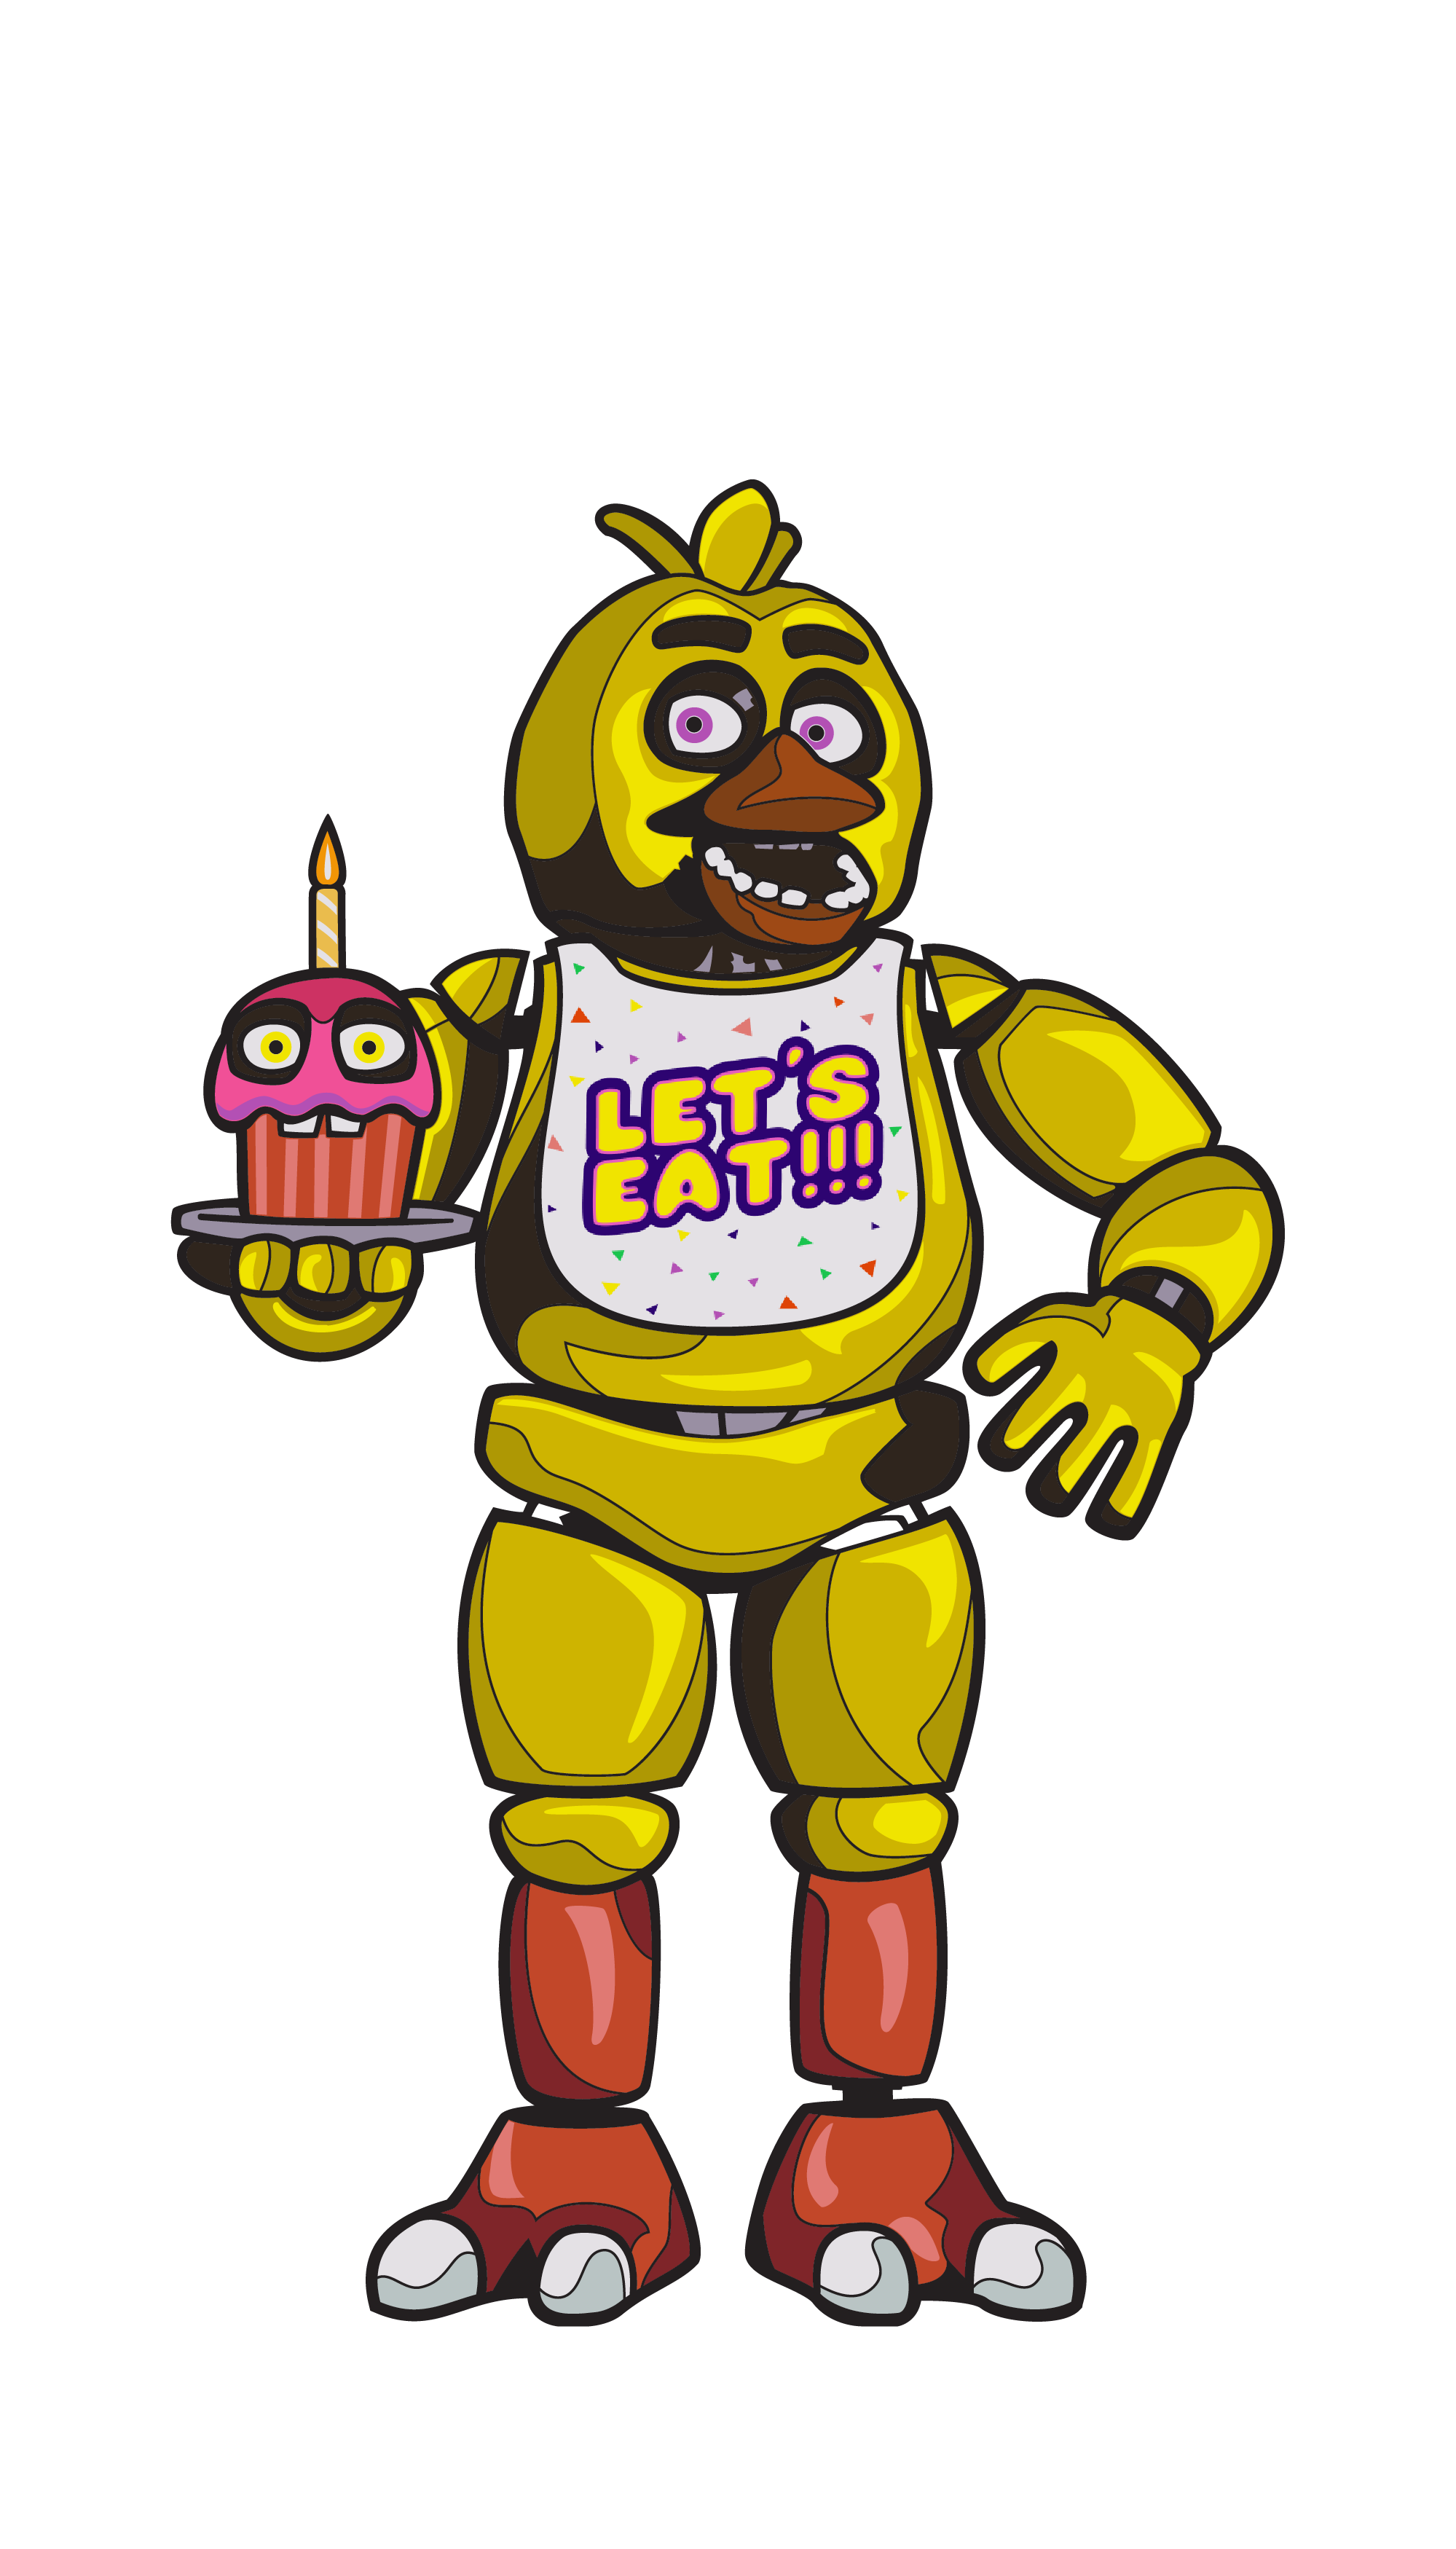 Art Render of Five Nights at Freddy's Chica enamel pin.